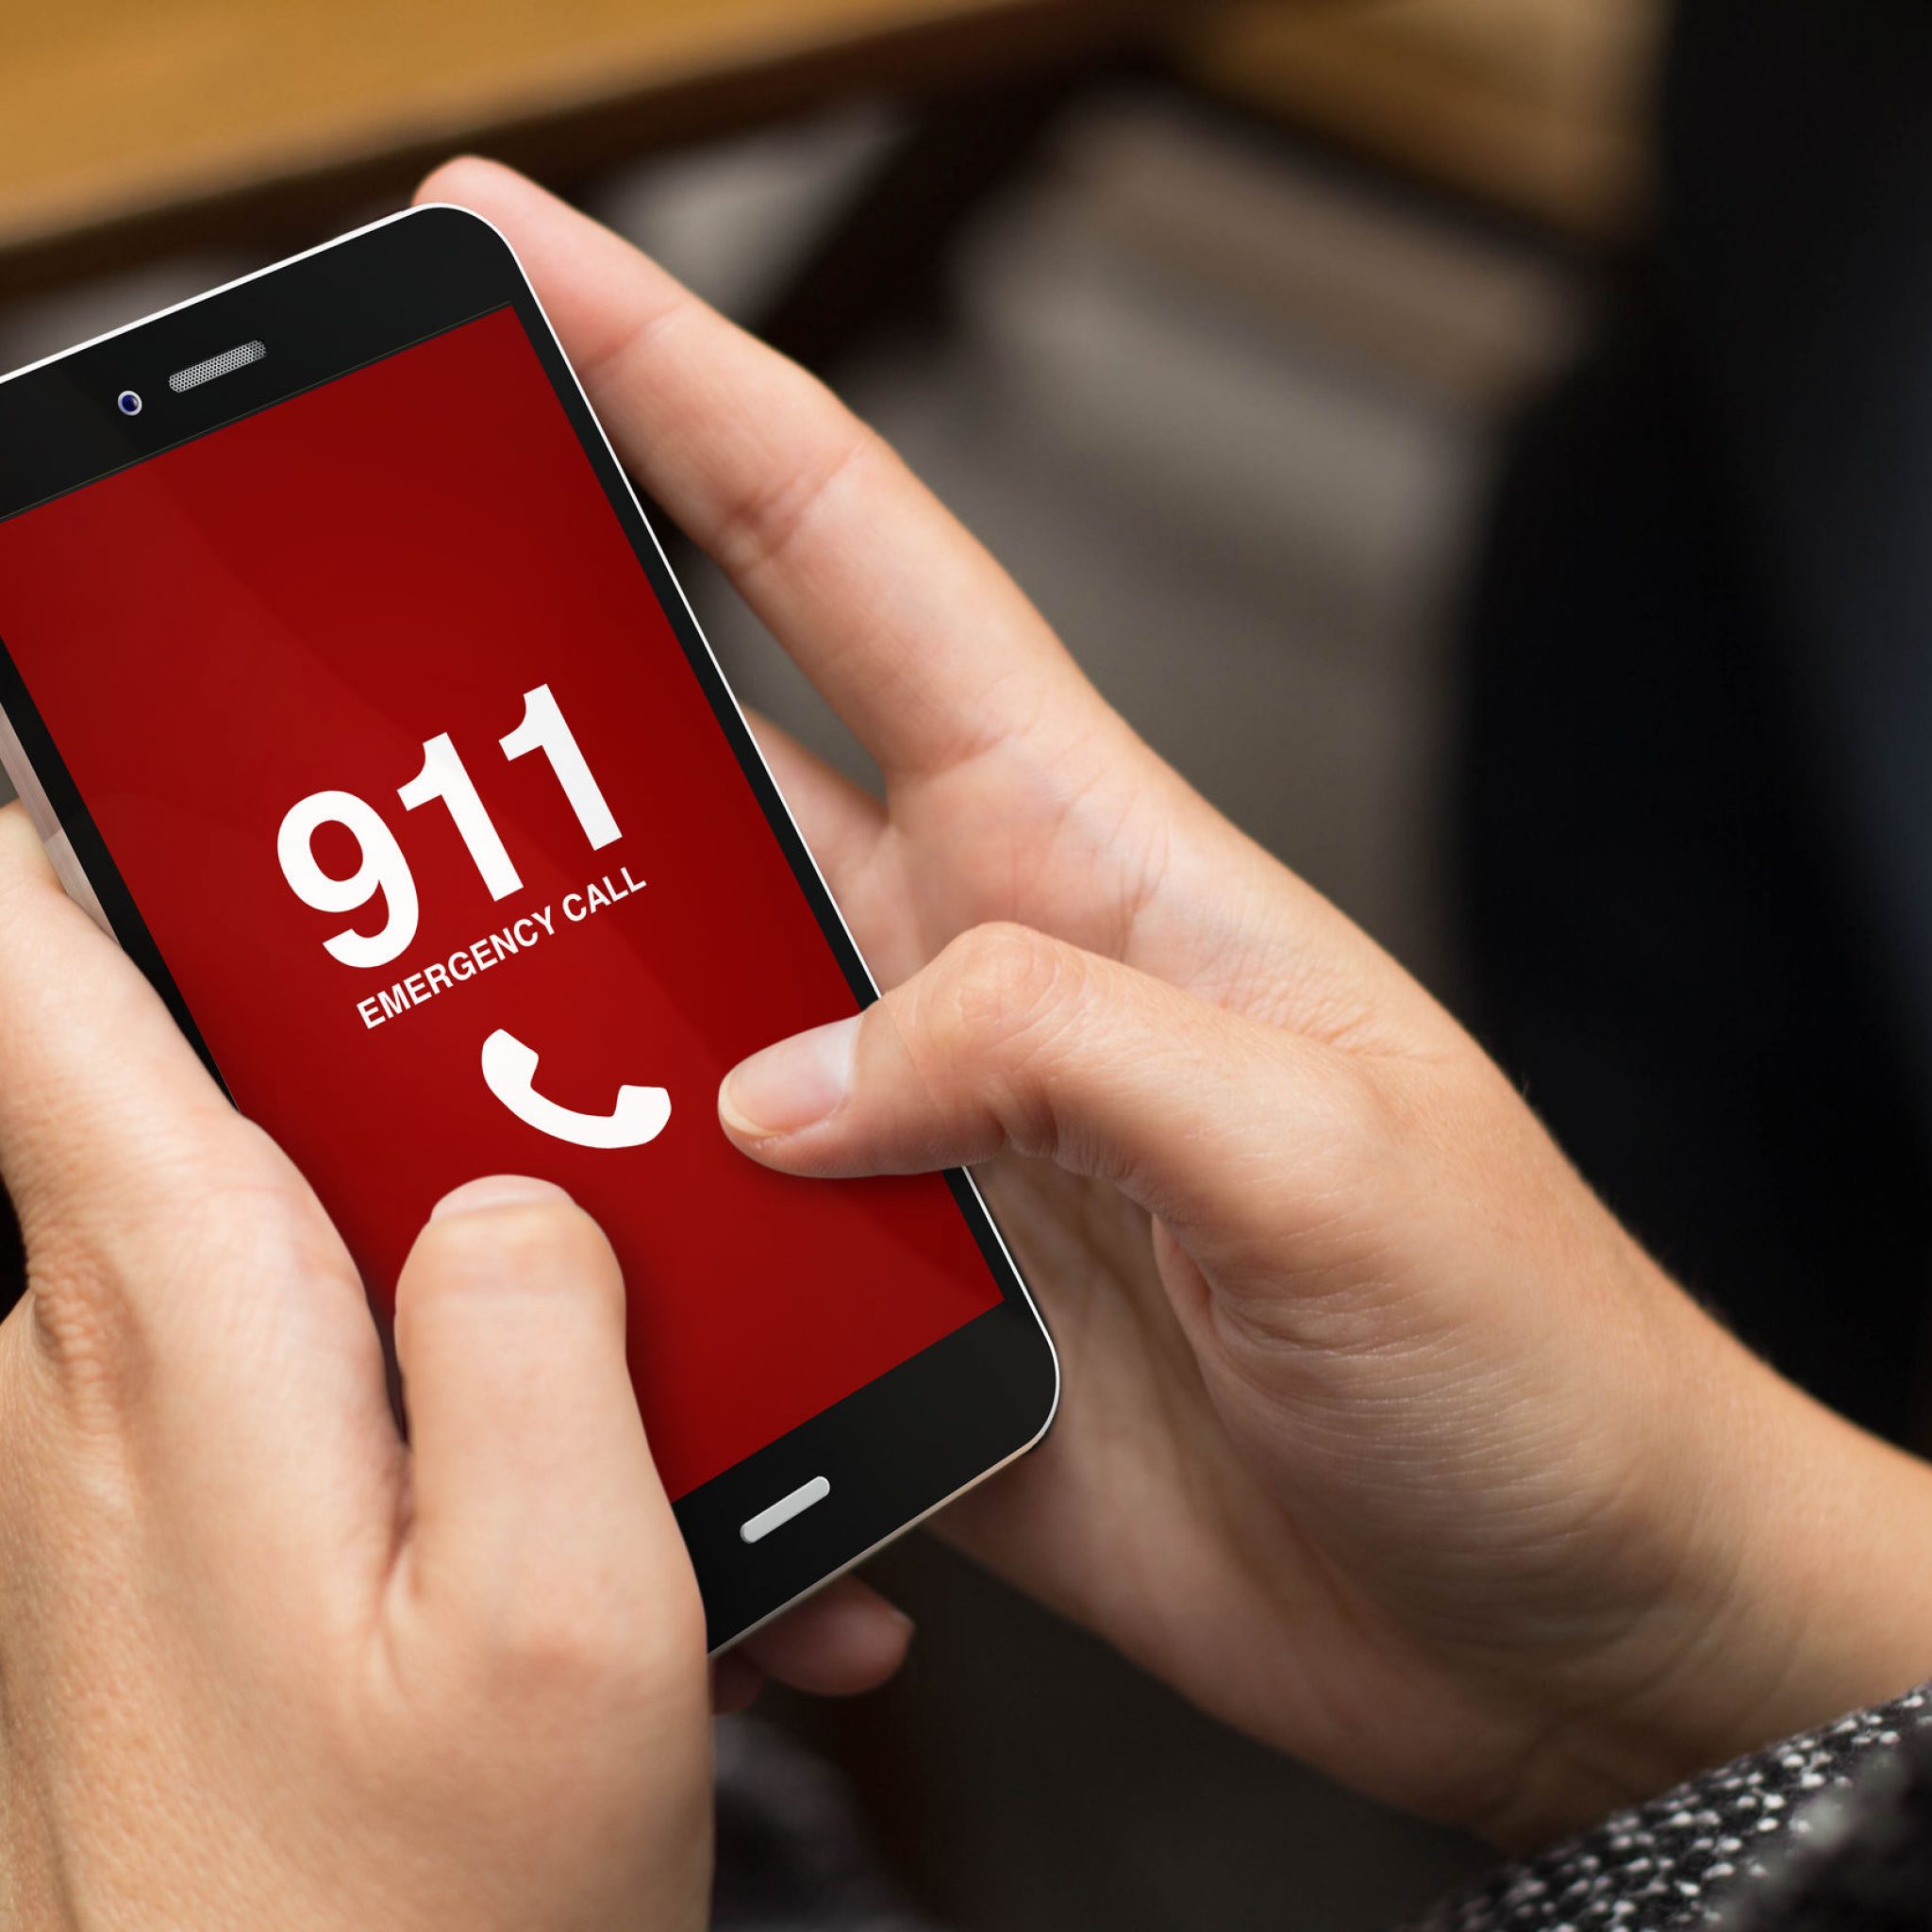 How many 911 calls are wireless? Key stats from the FCC’s 2020 911 fee report (Part 1)